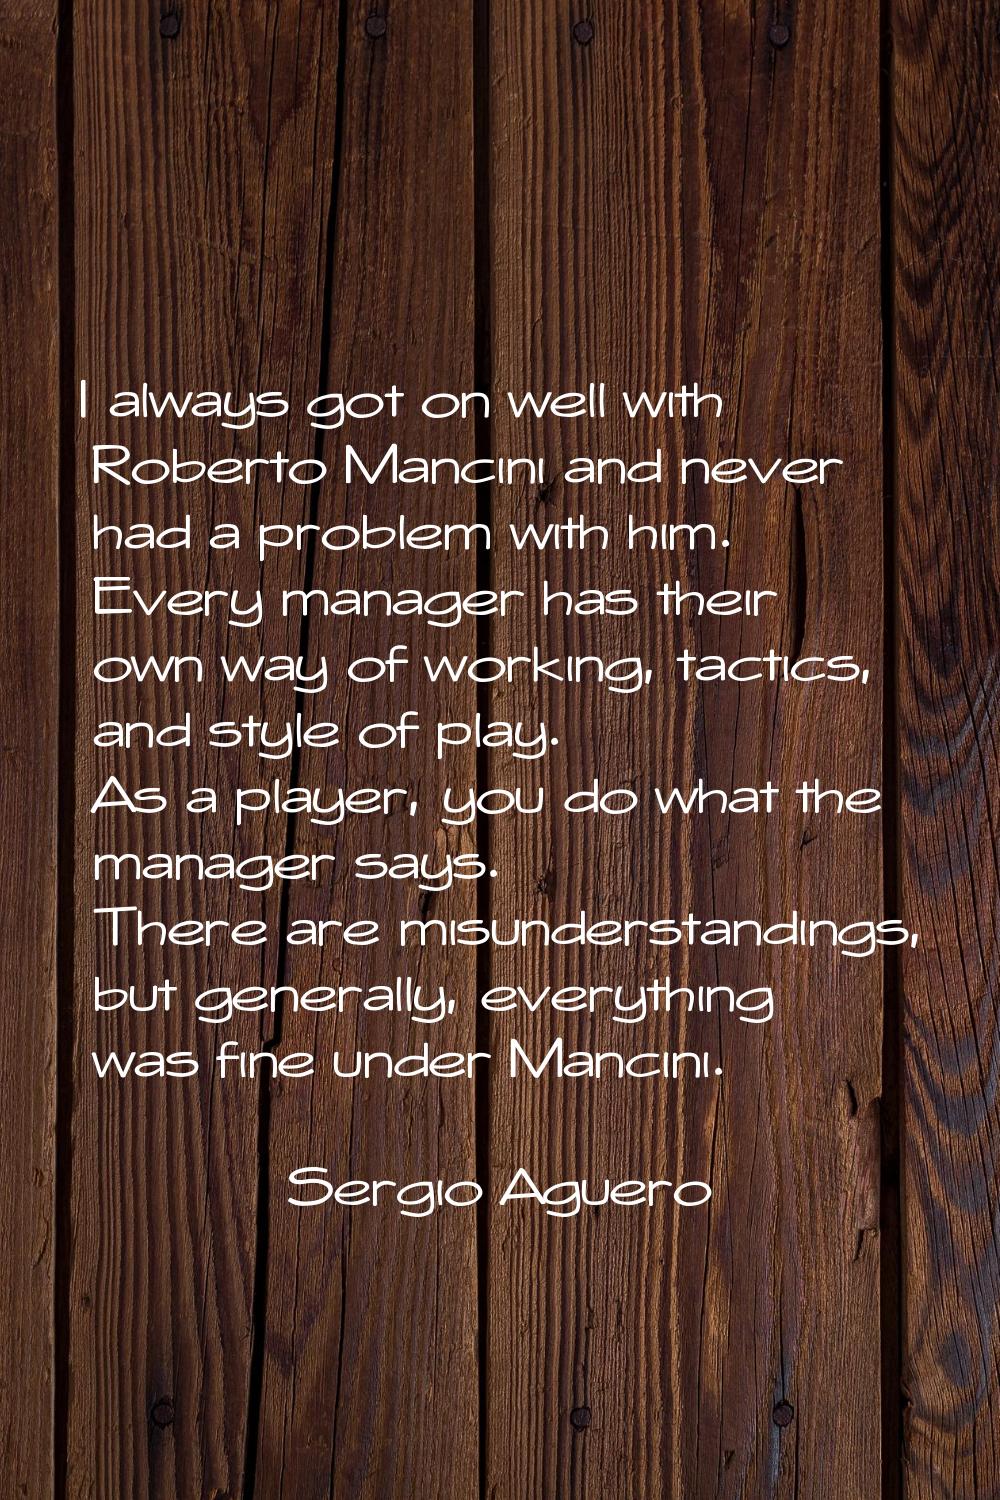 I always got on well with Roberto Mancini and never had a problem with him. Every manager has their